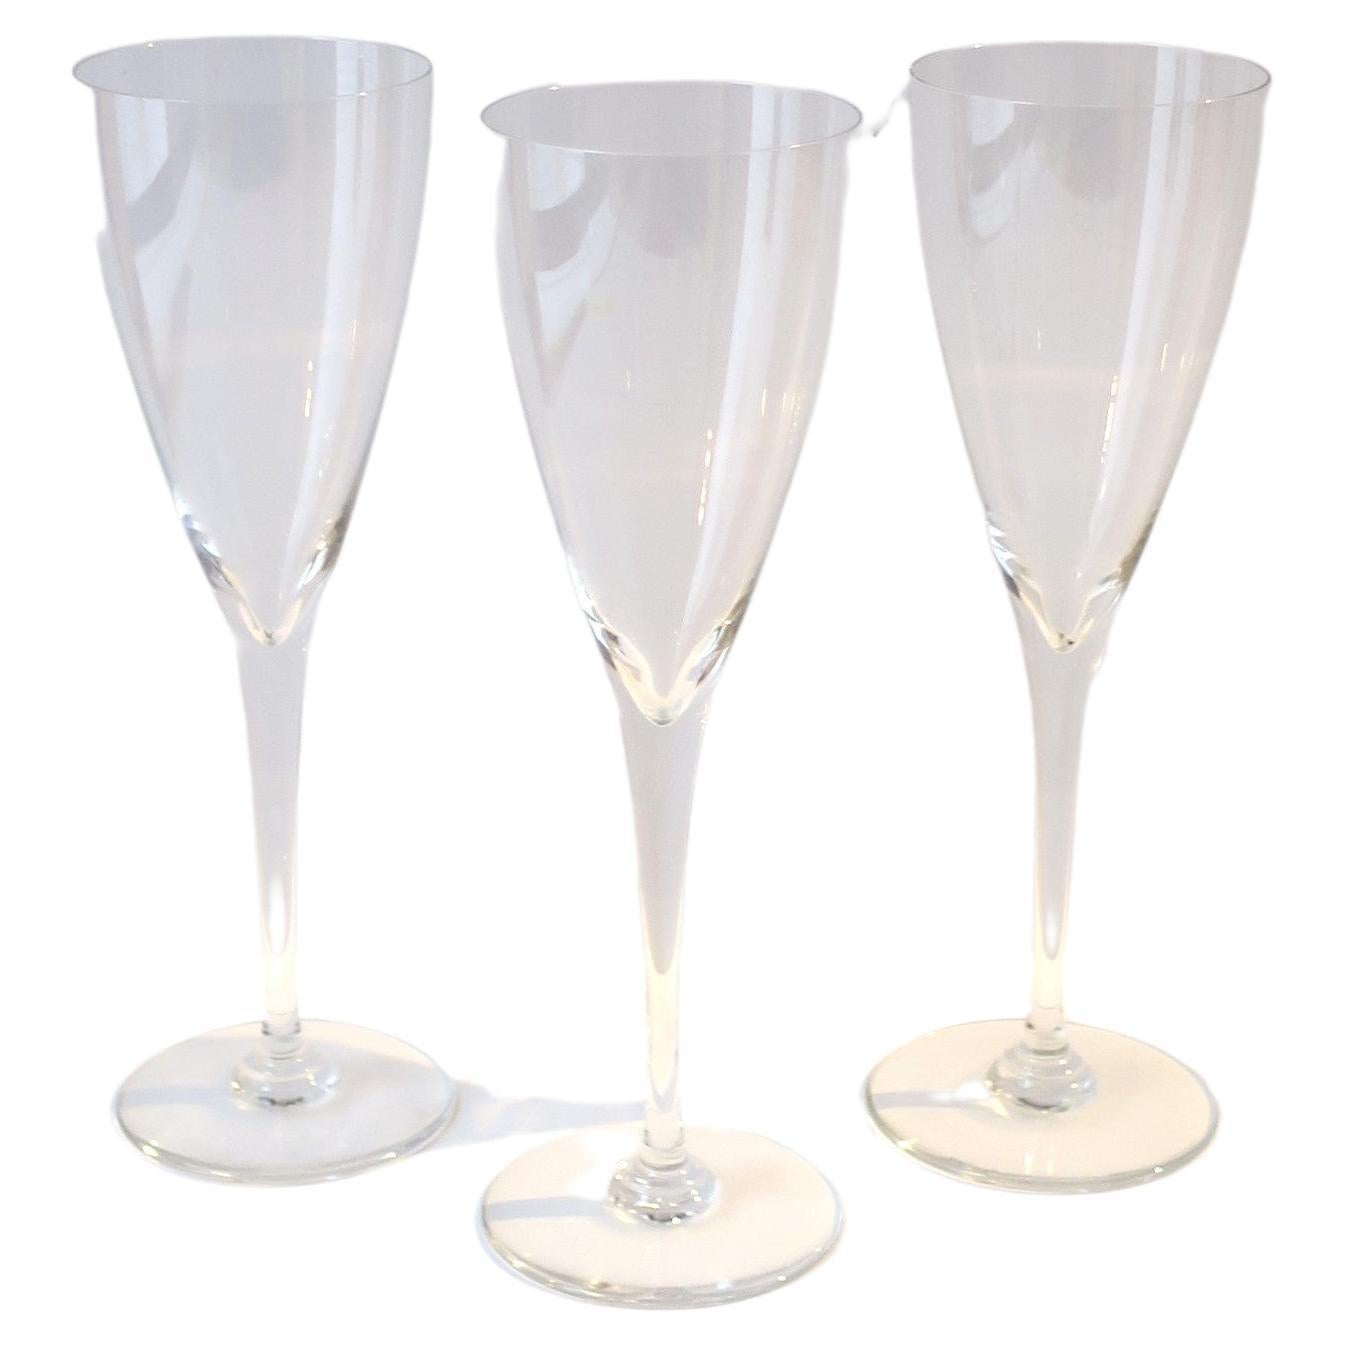 French Baccarat Crystal Champagne Flutes Glasses, Set of 3 For Sale